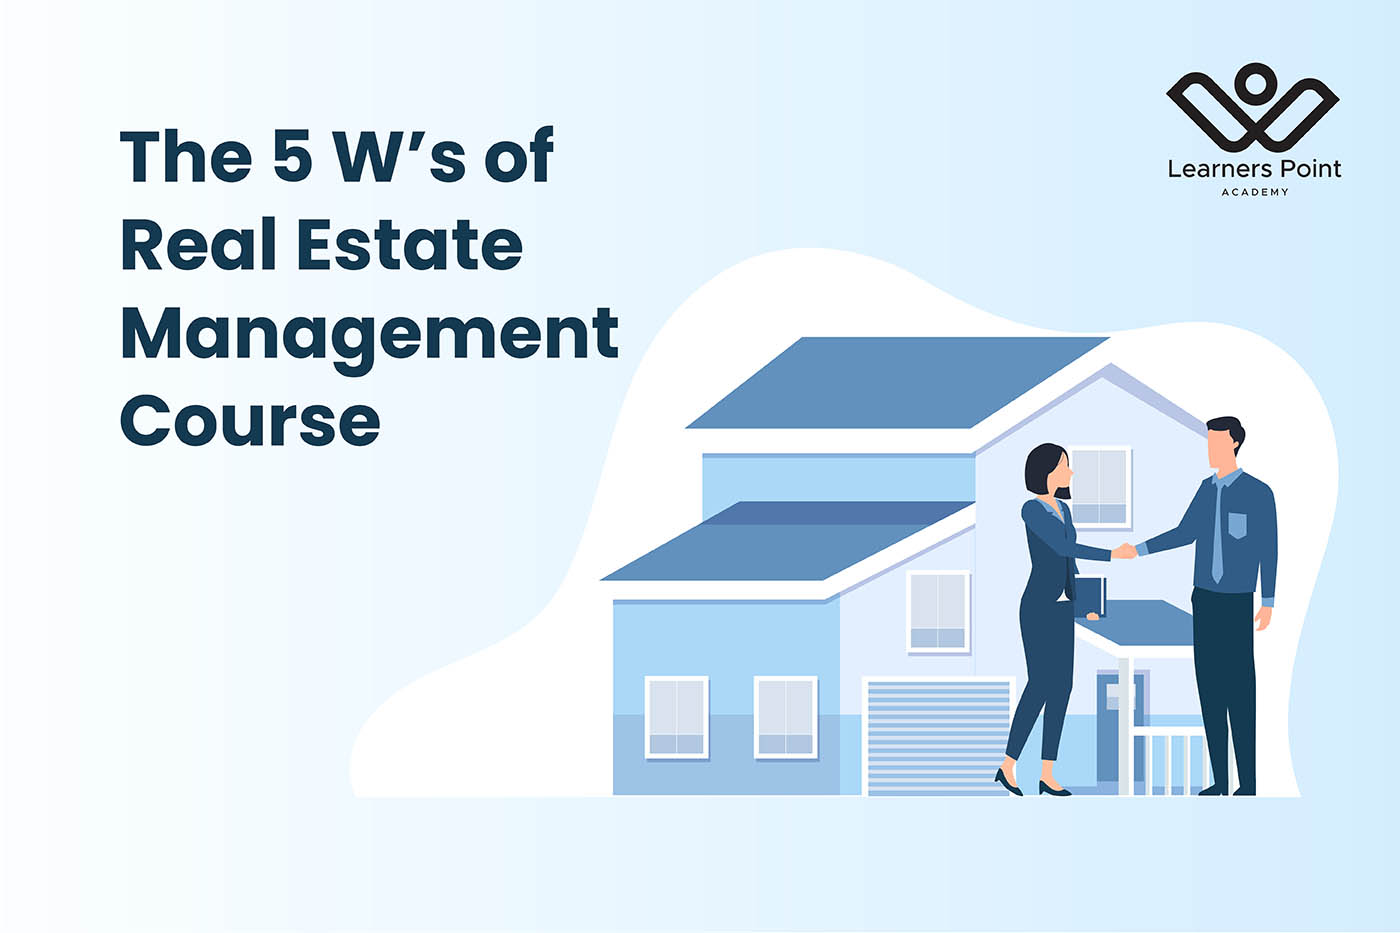 The 5 W’s of Real Estate Management Course